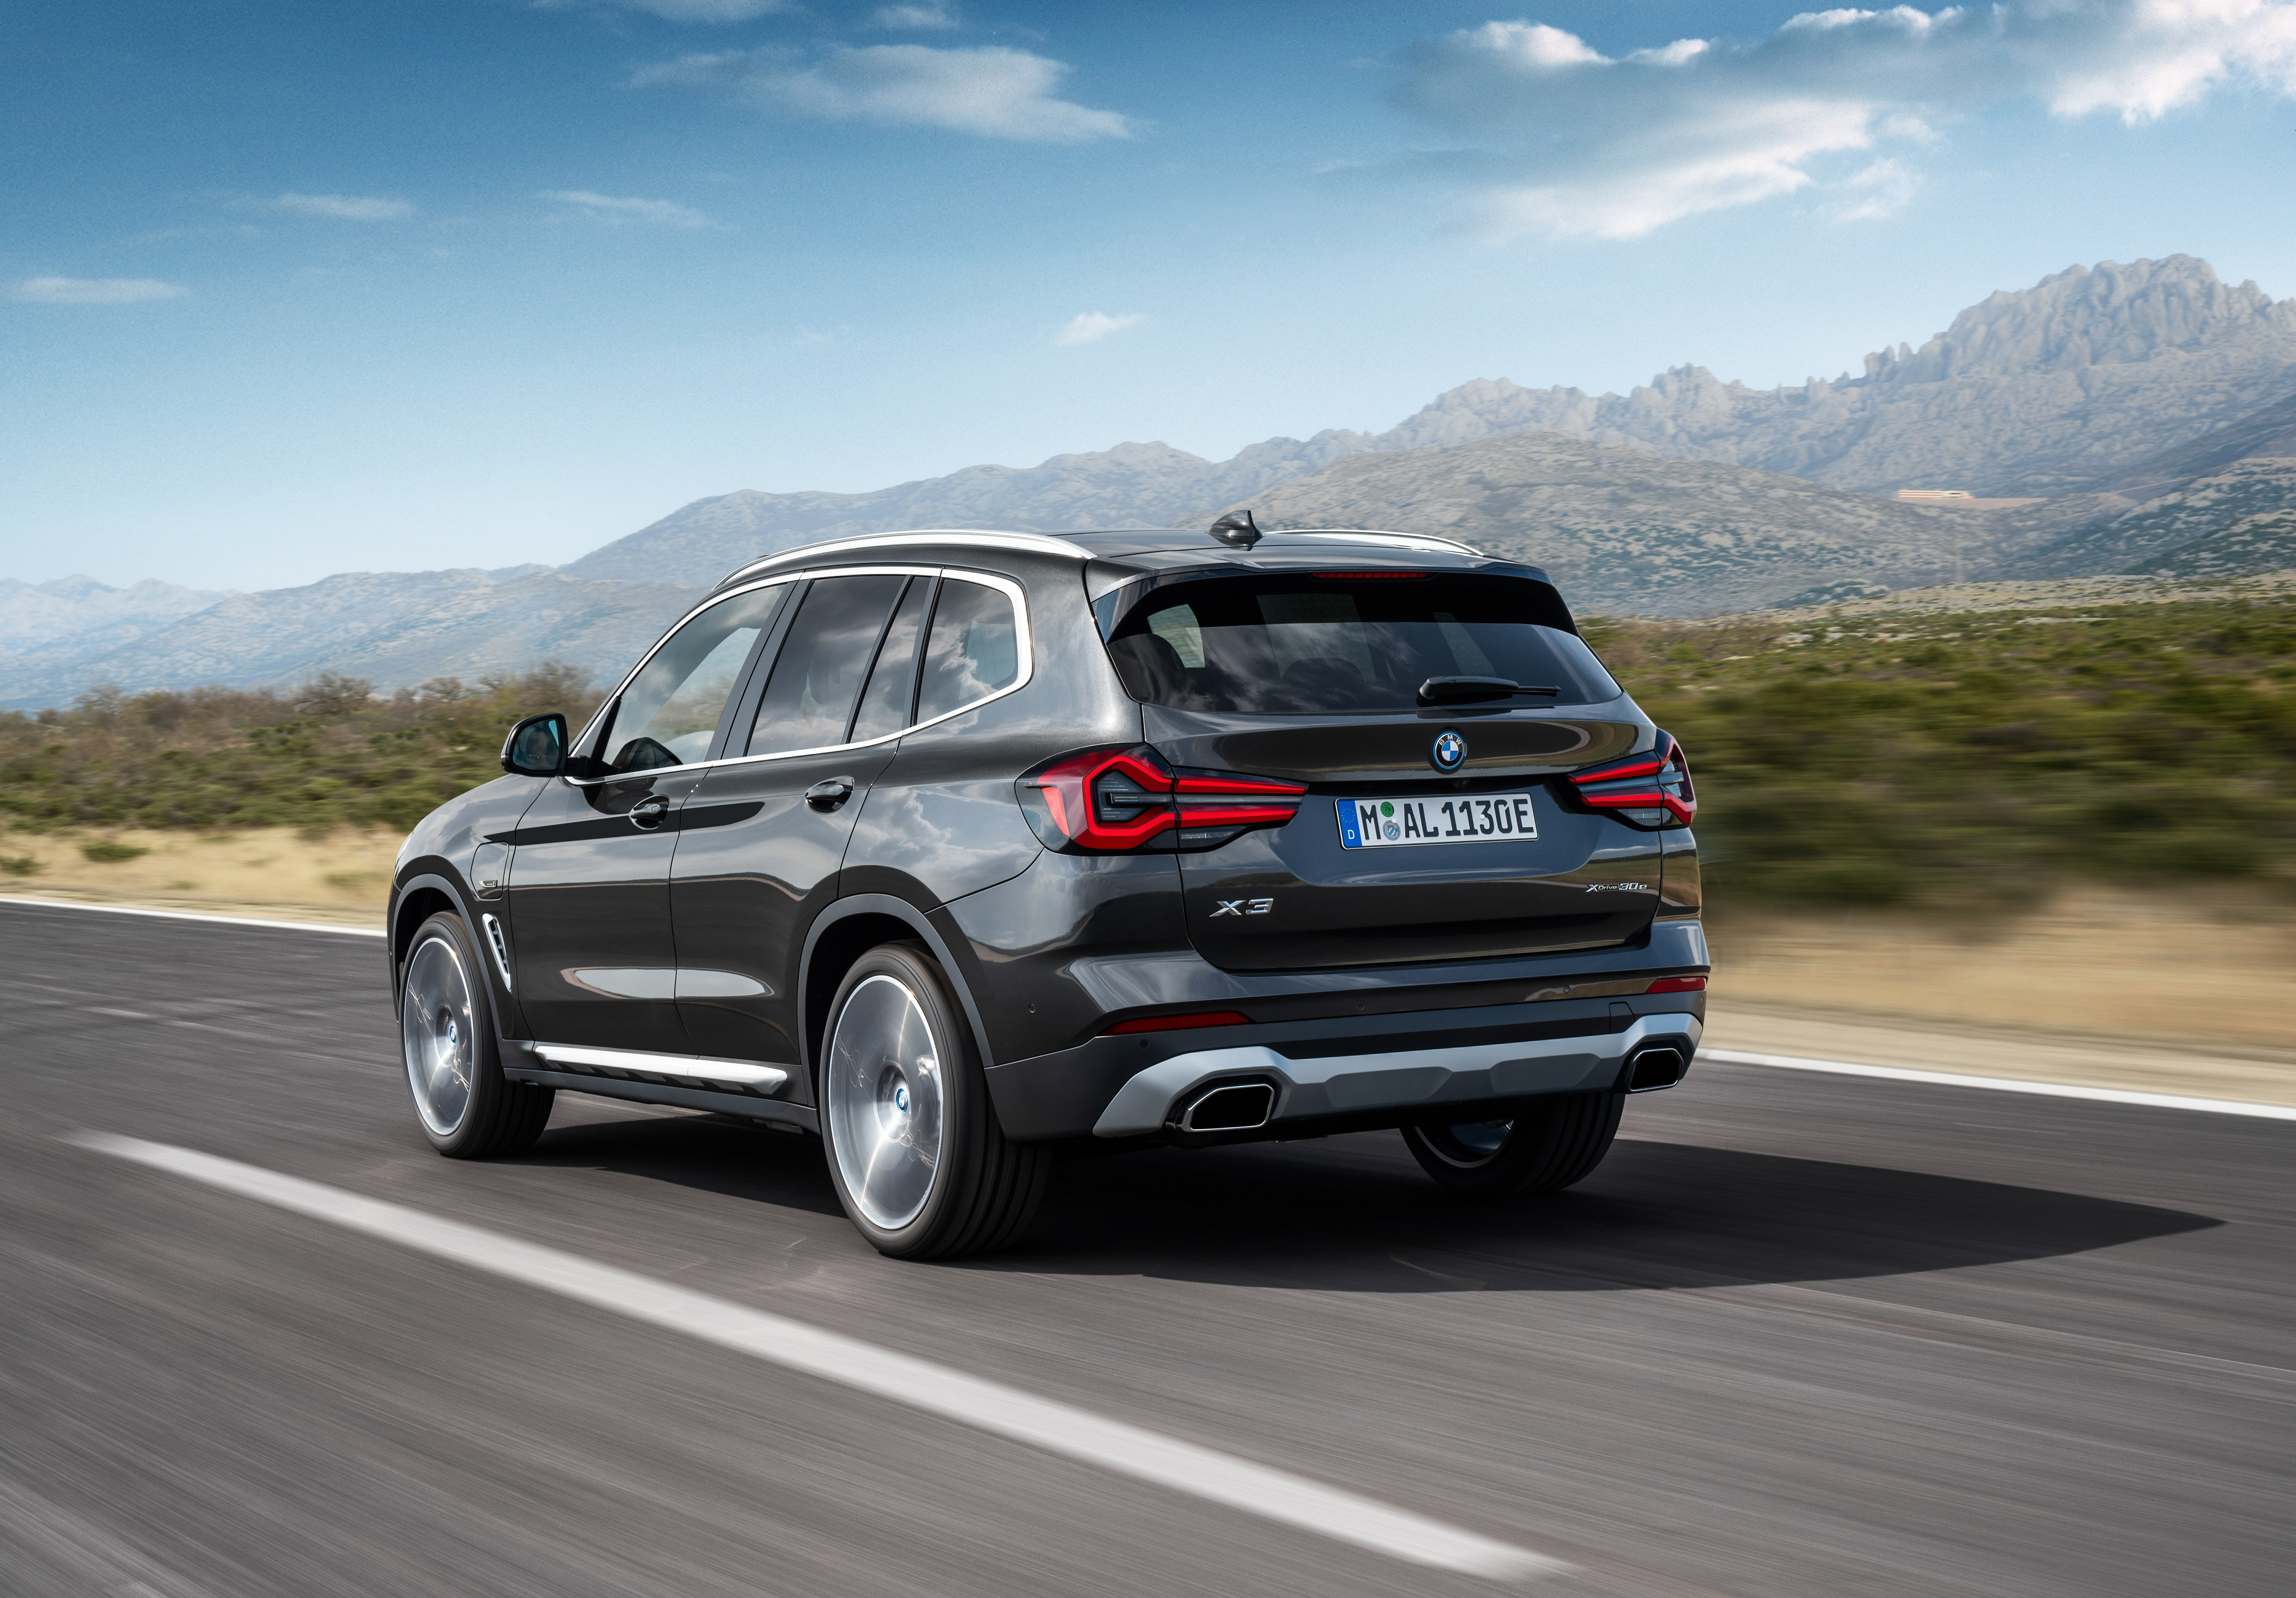 2021 BMW X3 and X4 facelifts revealed - G01 and G02 LCI get new styling,  mild hybrid engines, equipment 